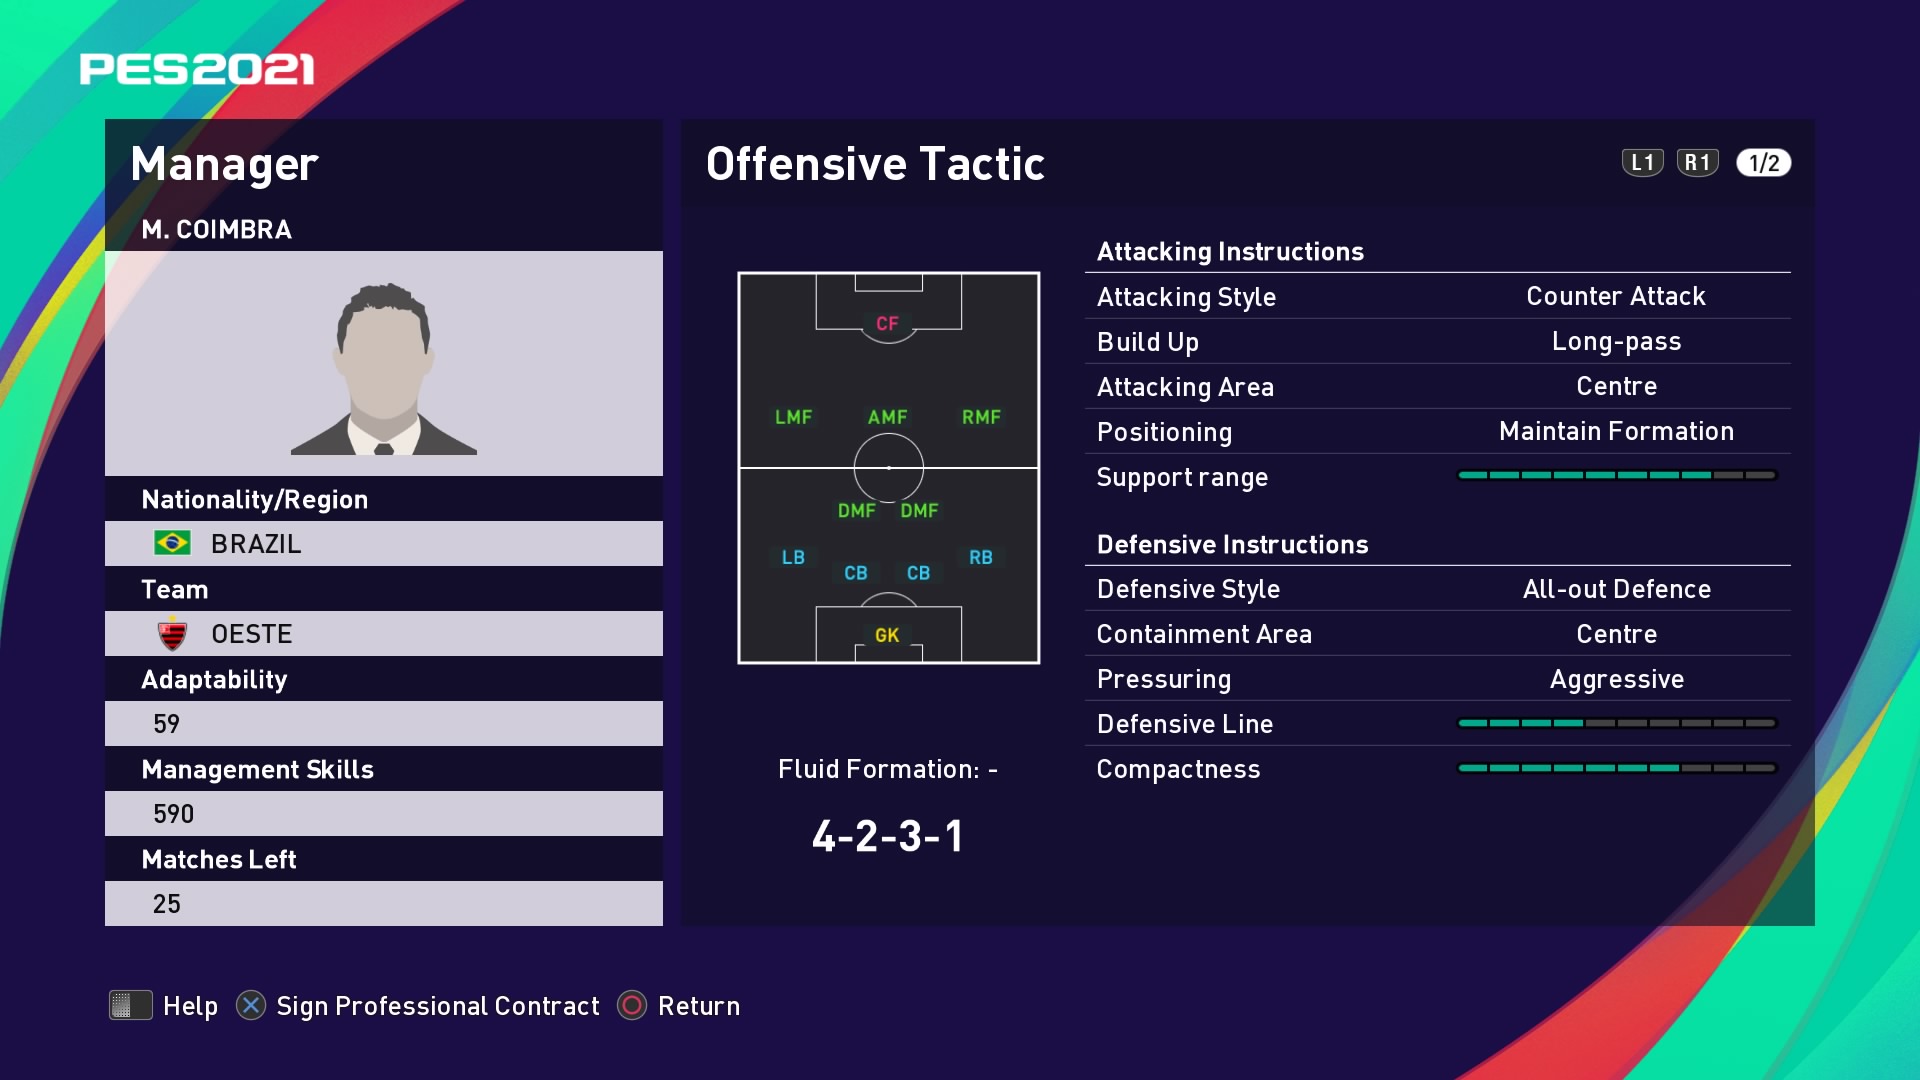 M. Coimbra (Roberto Cavalo) Offensive Tactic in PES 2021 myClub